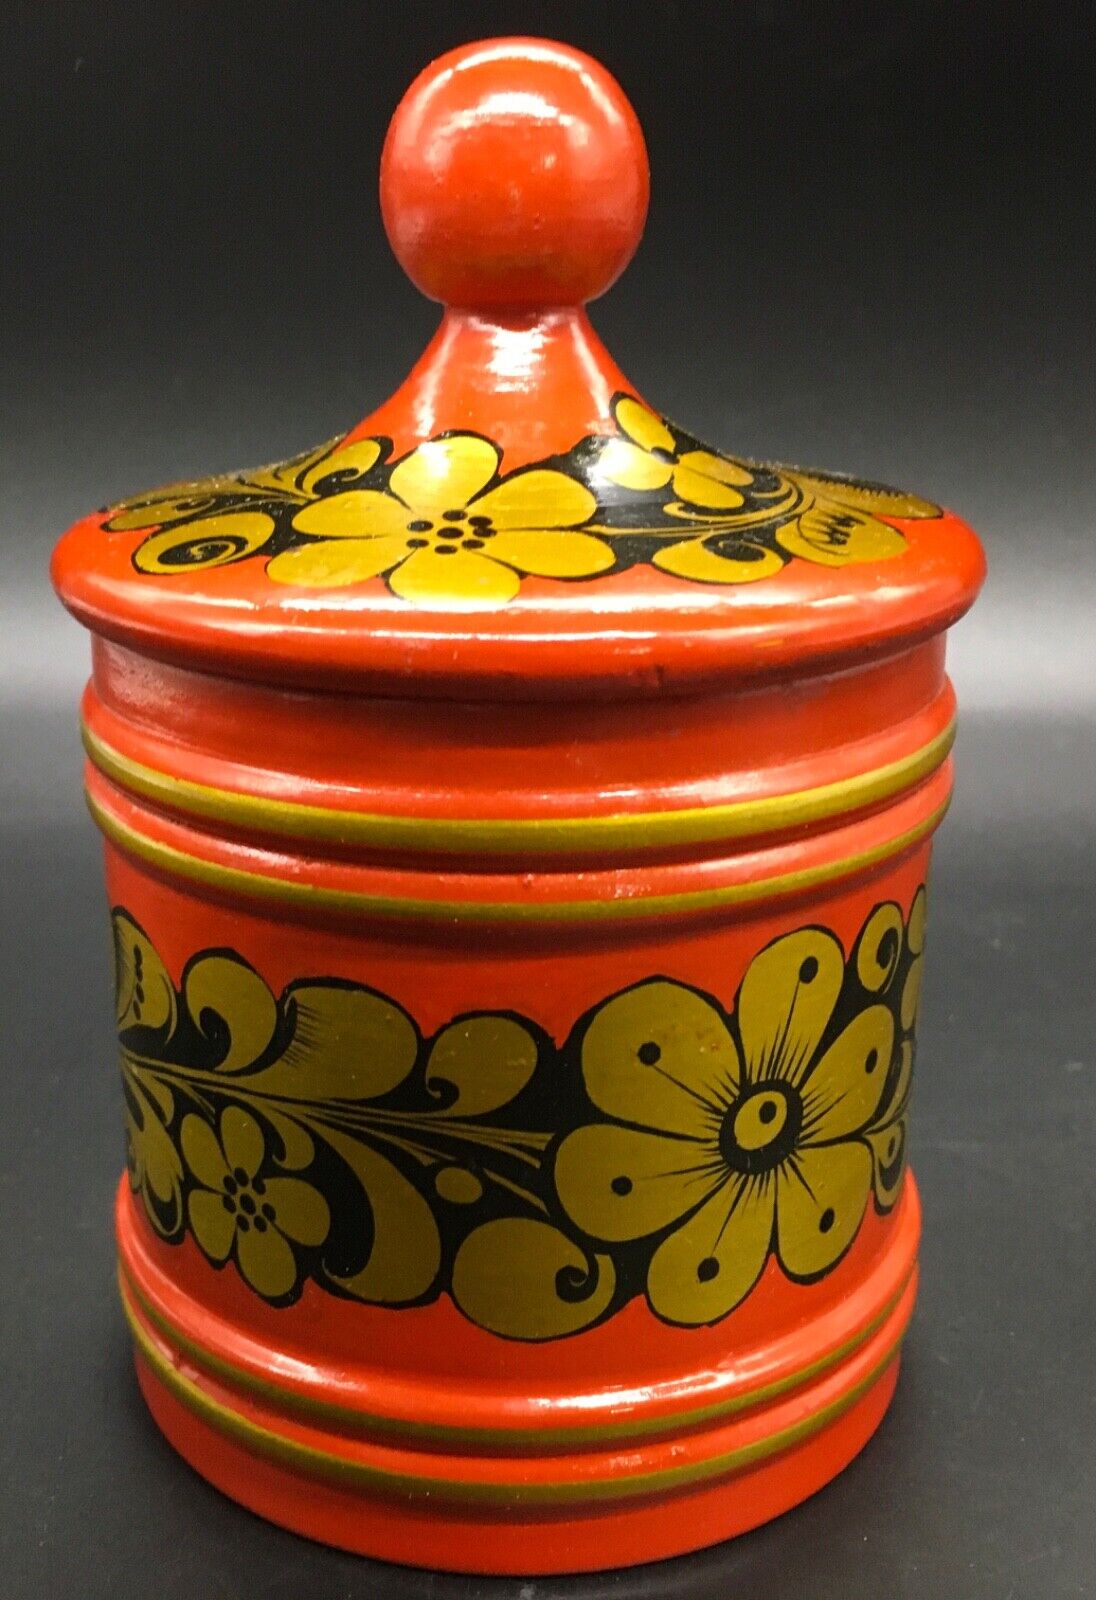 USSR 1984 lacquer lidded canister gold & black hand painted on rust red 5” X 3” 